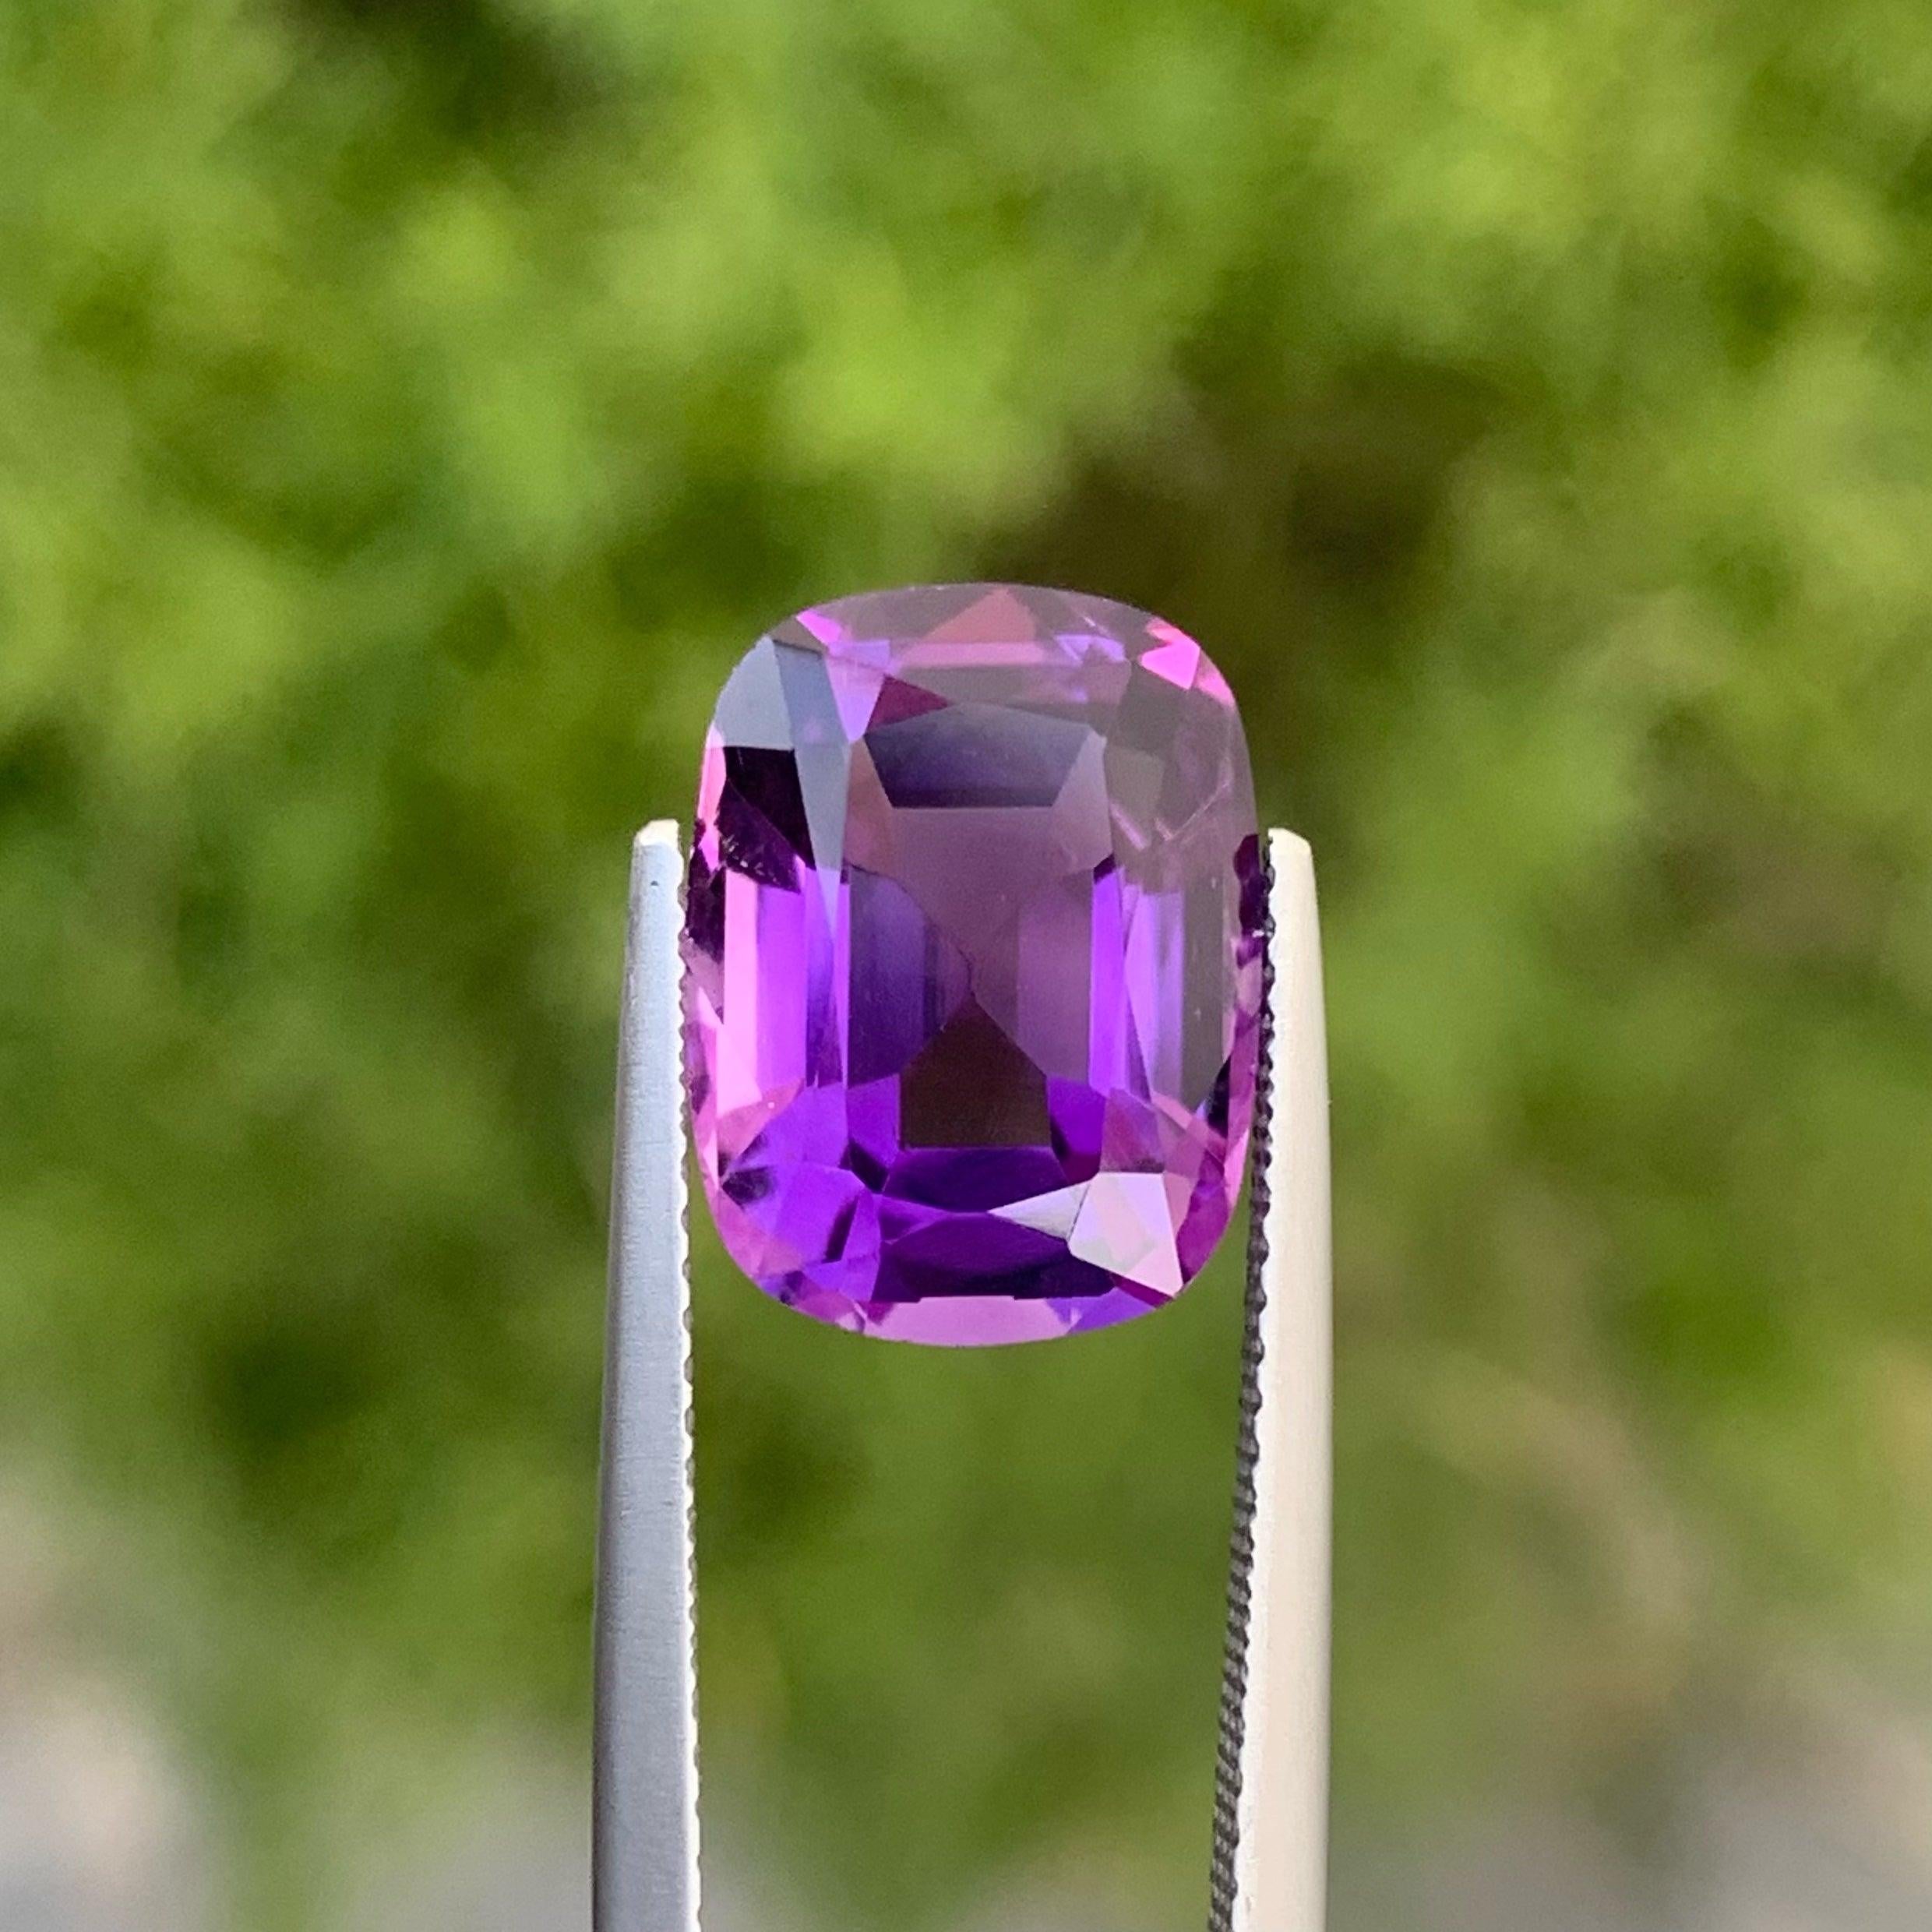 Stunning Natural Purple Amethyst Gemstone, available for sale at wholesale natural high quality Cushion shape 5.35 carats faceted Cushion Cut  amethyst from Brazil.

 Product Information:
GEMSTONE TYPE:	Stunning Natural Purple Amethyst